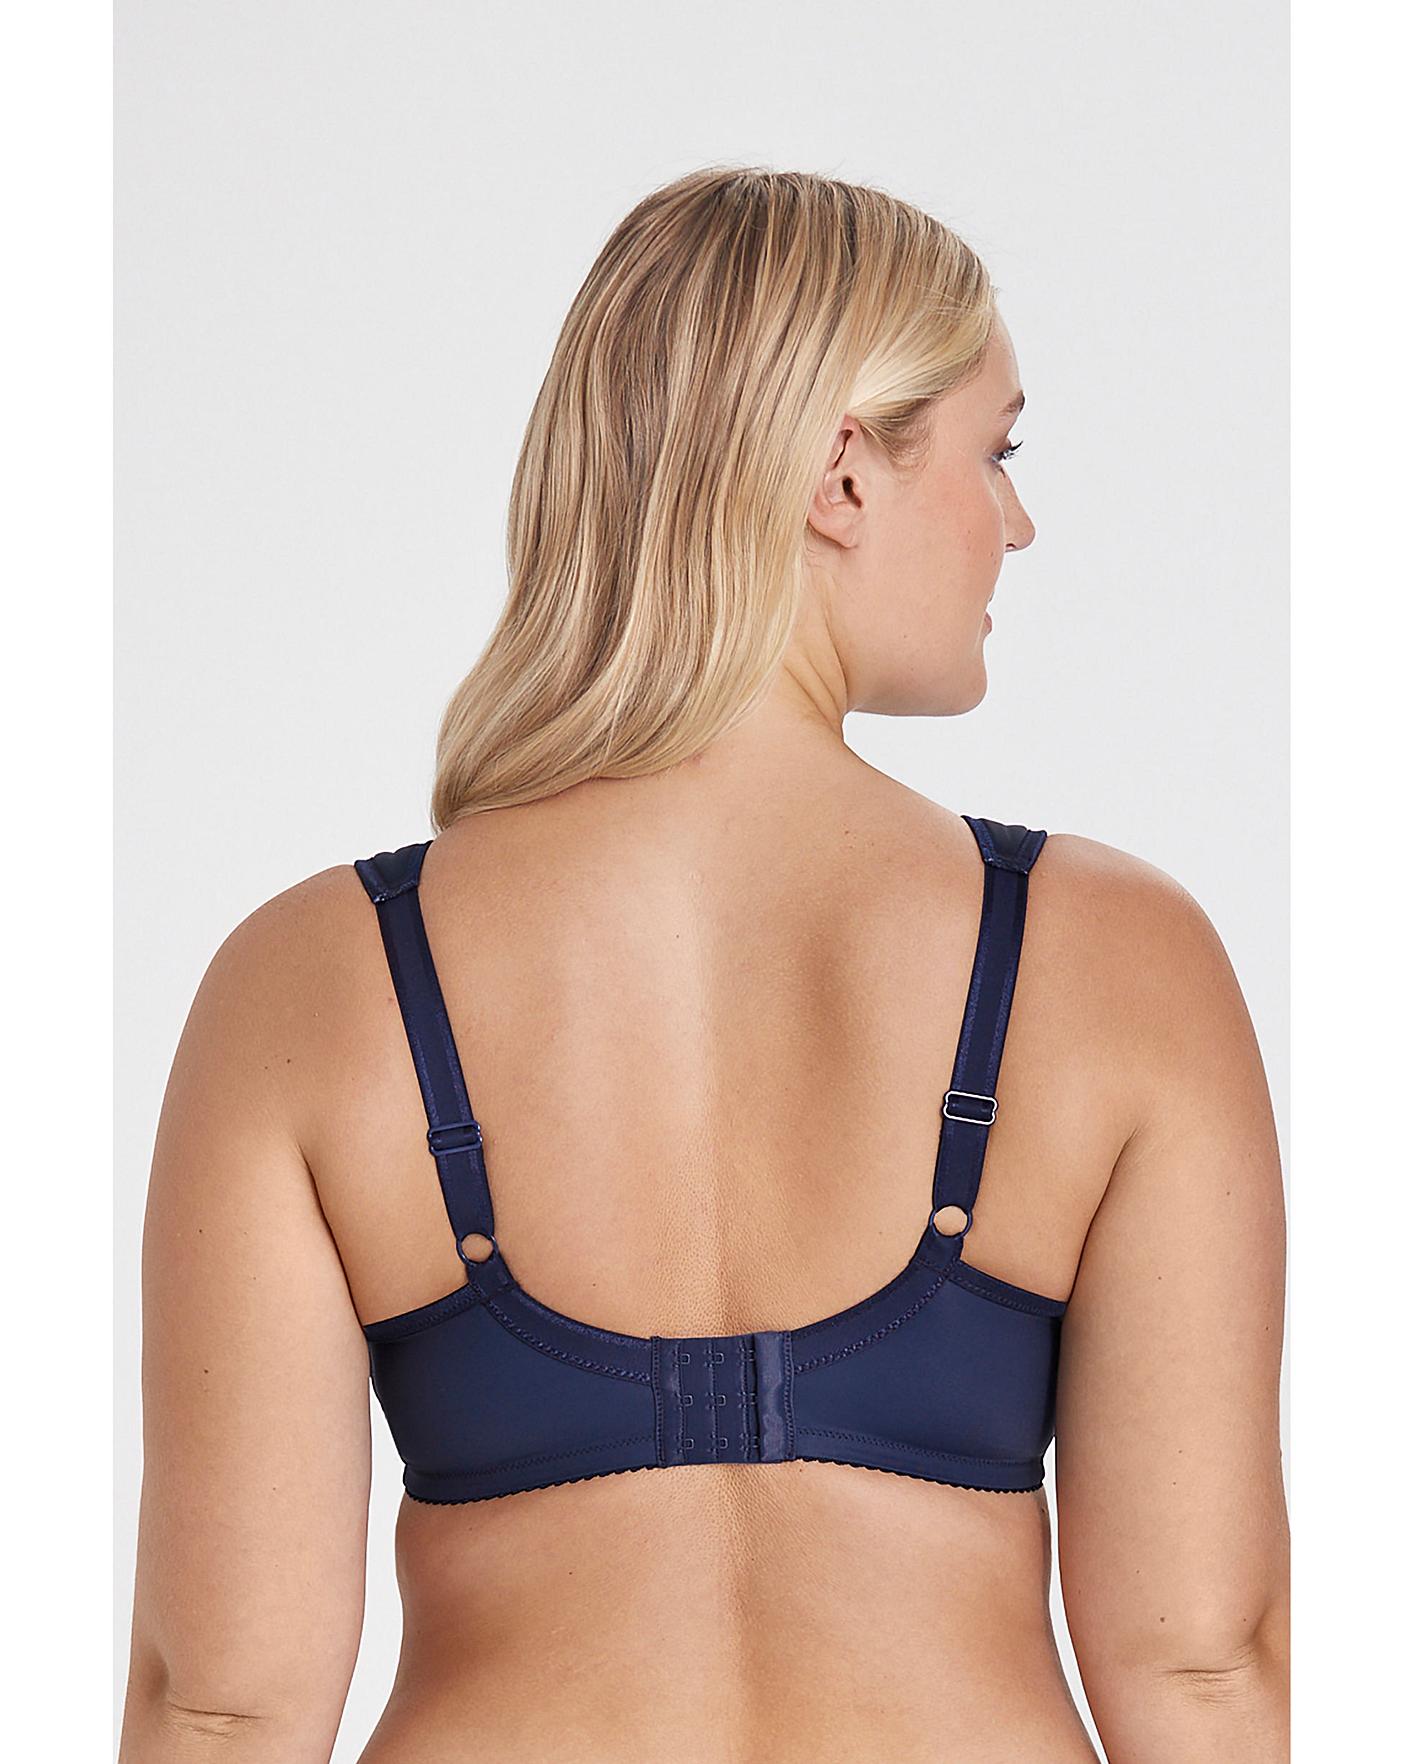 Smooth Lacy underwired bra – T-shirt bra that provides support and lift –  Miss Mary